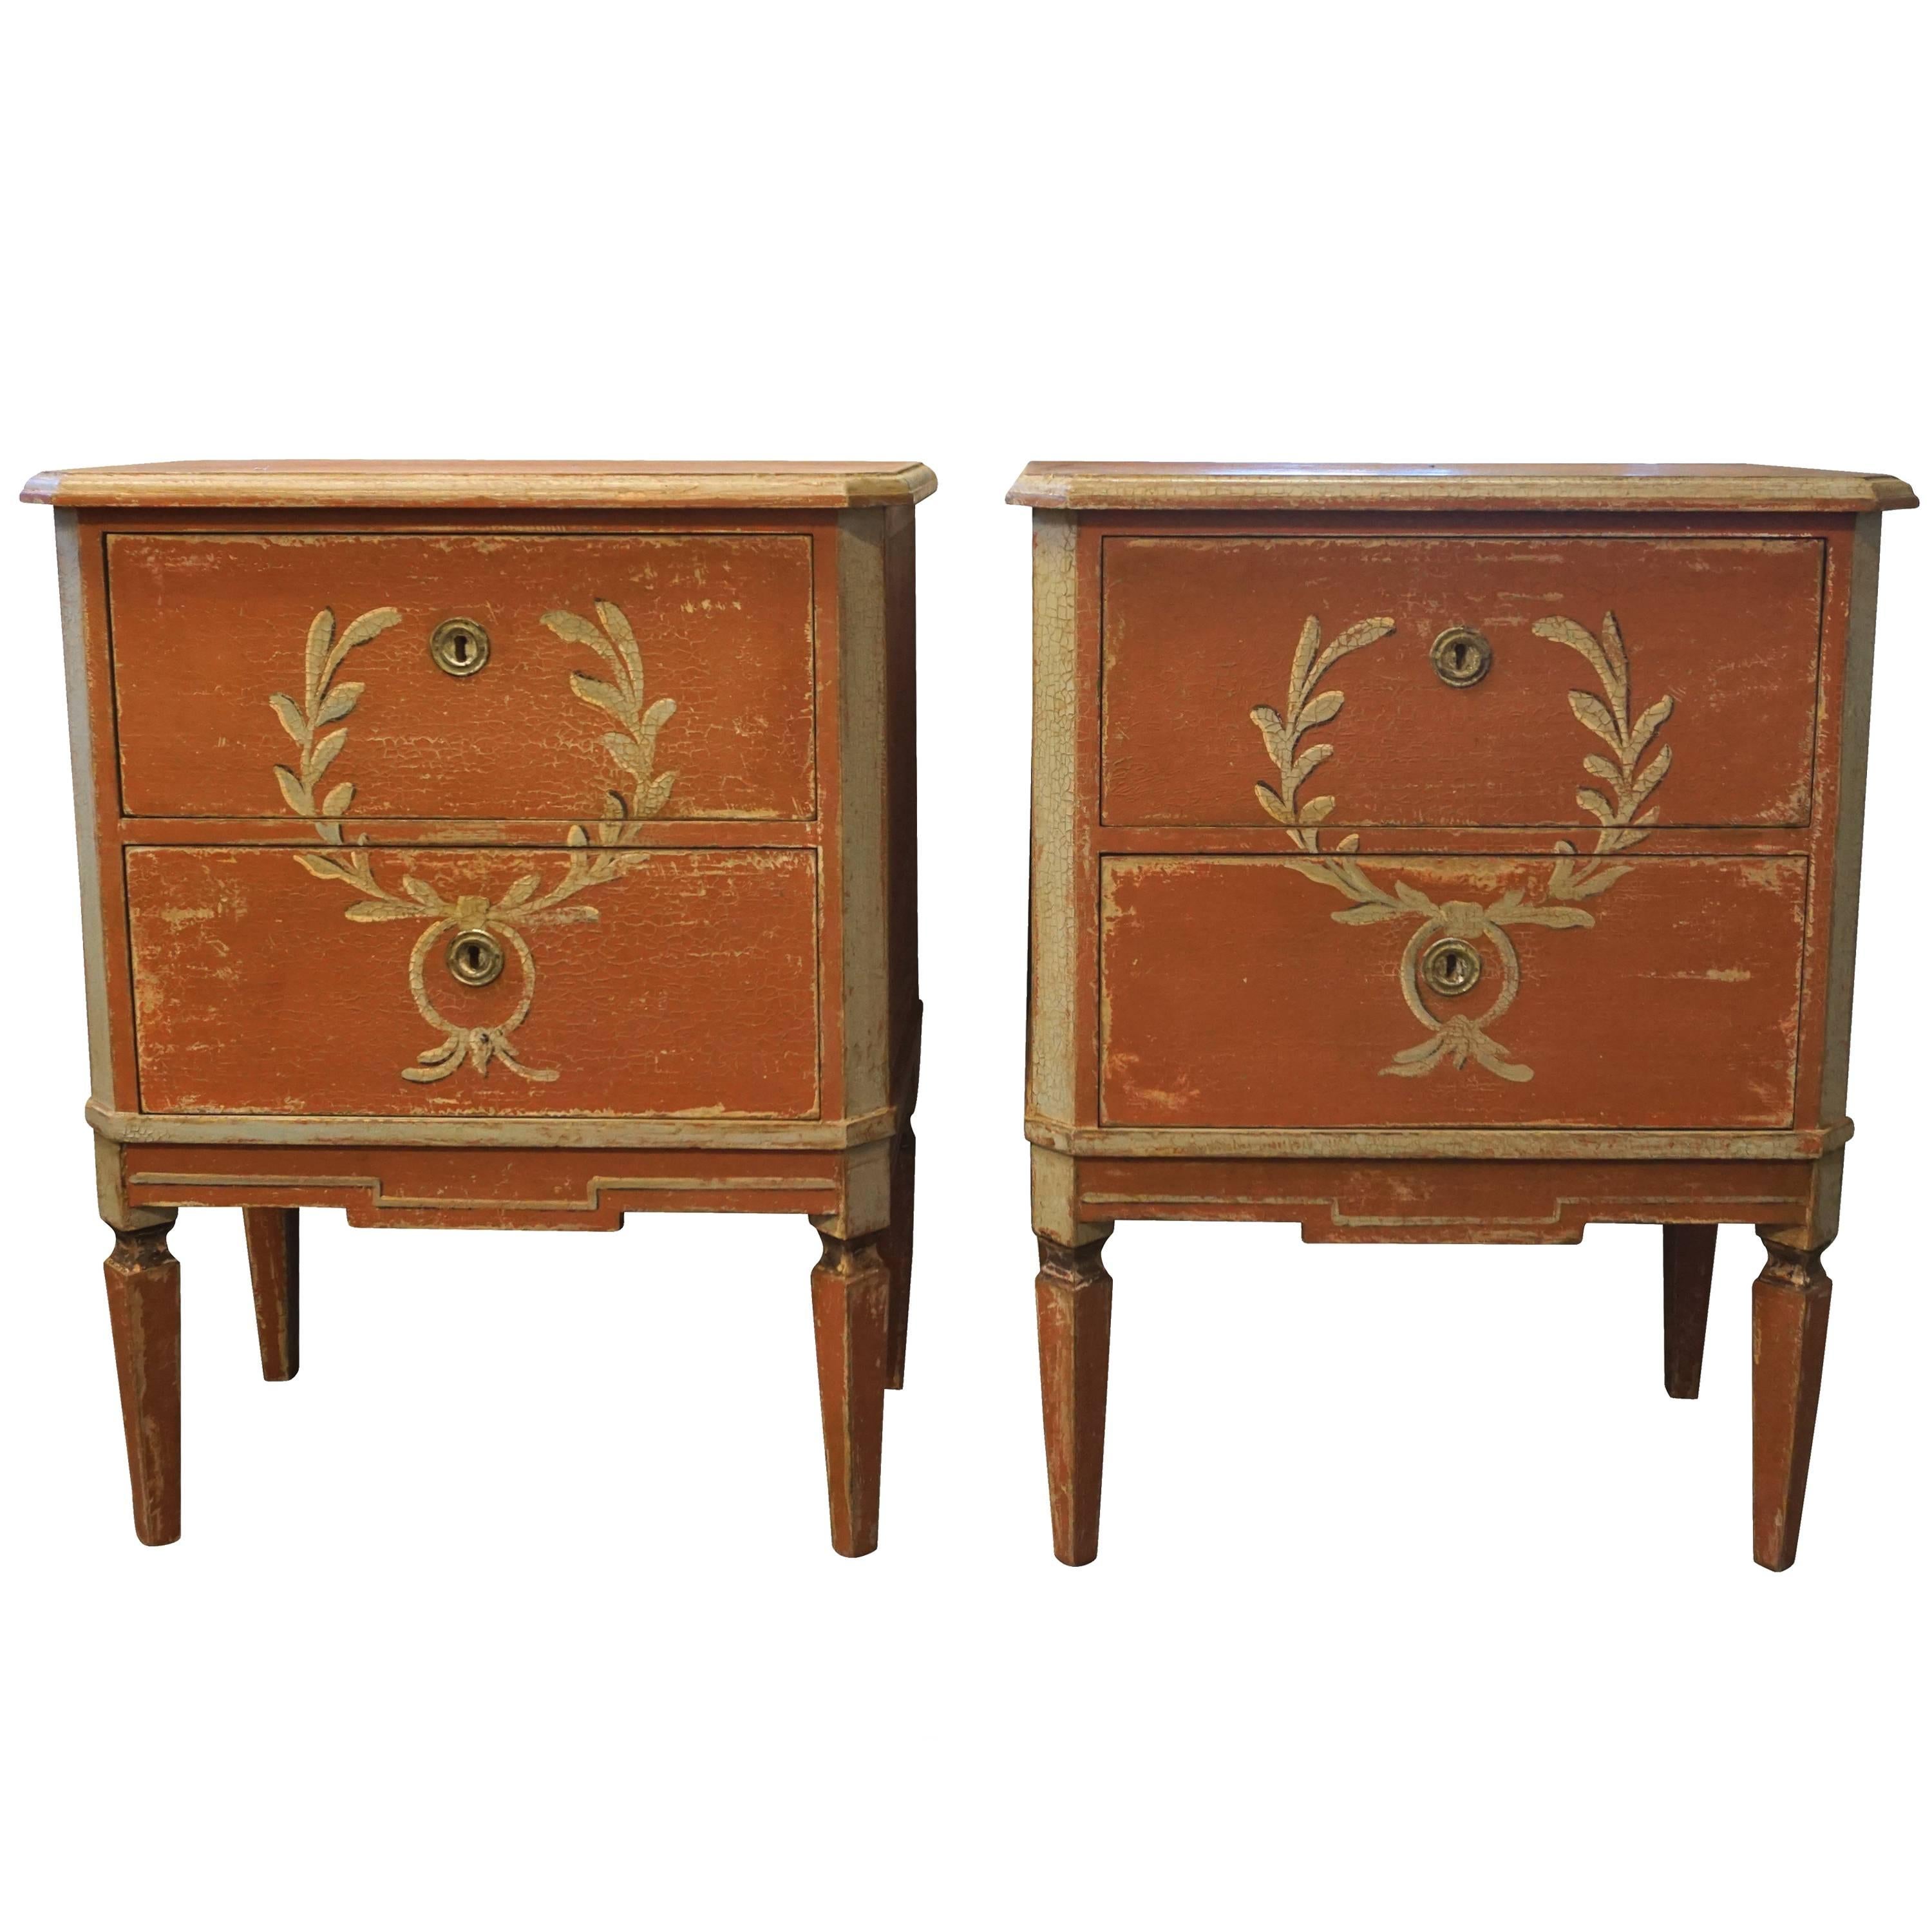 19th Century Pair of Small Gustavian Chests from Scandinavia